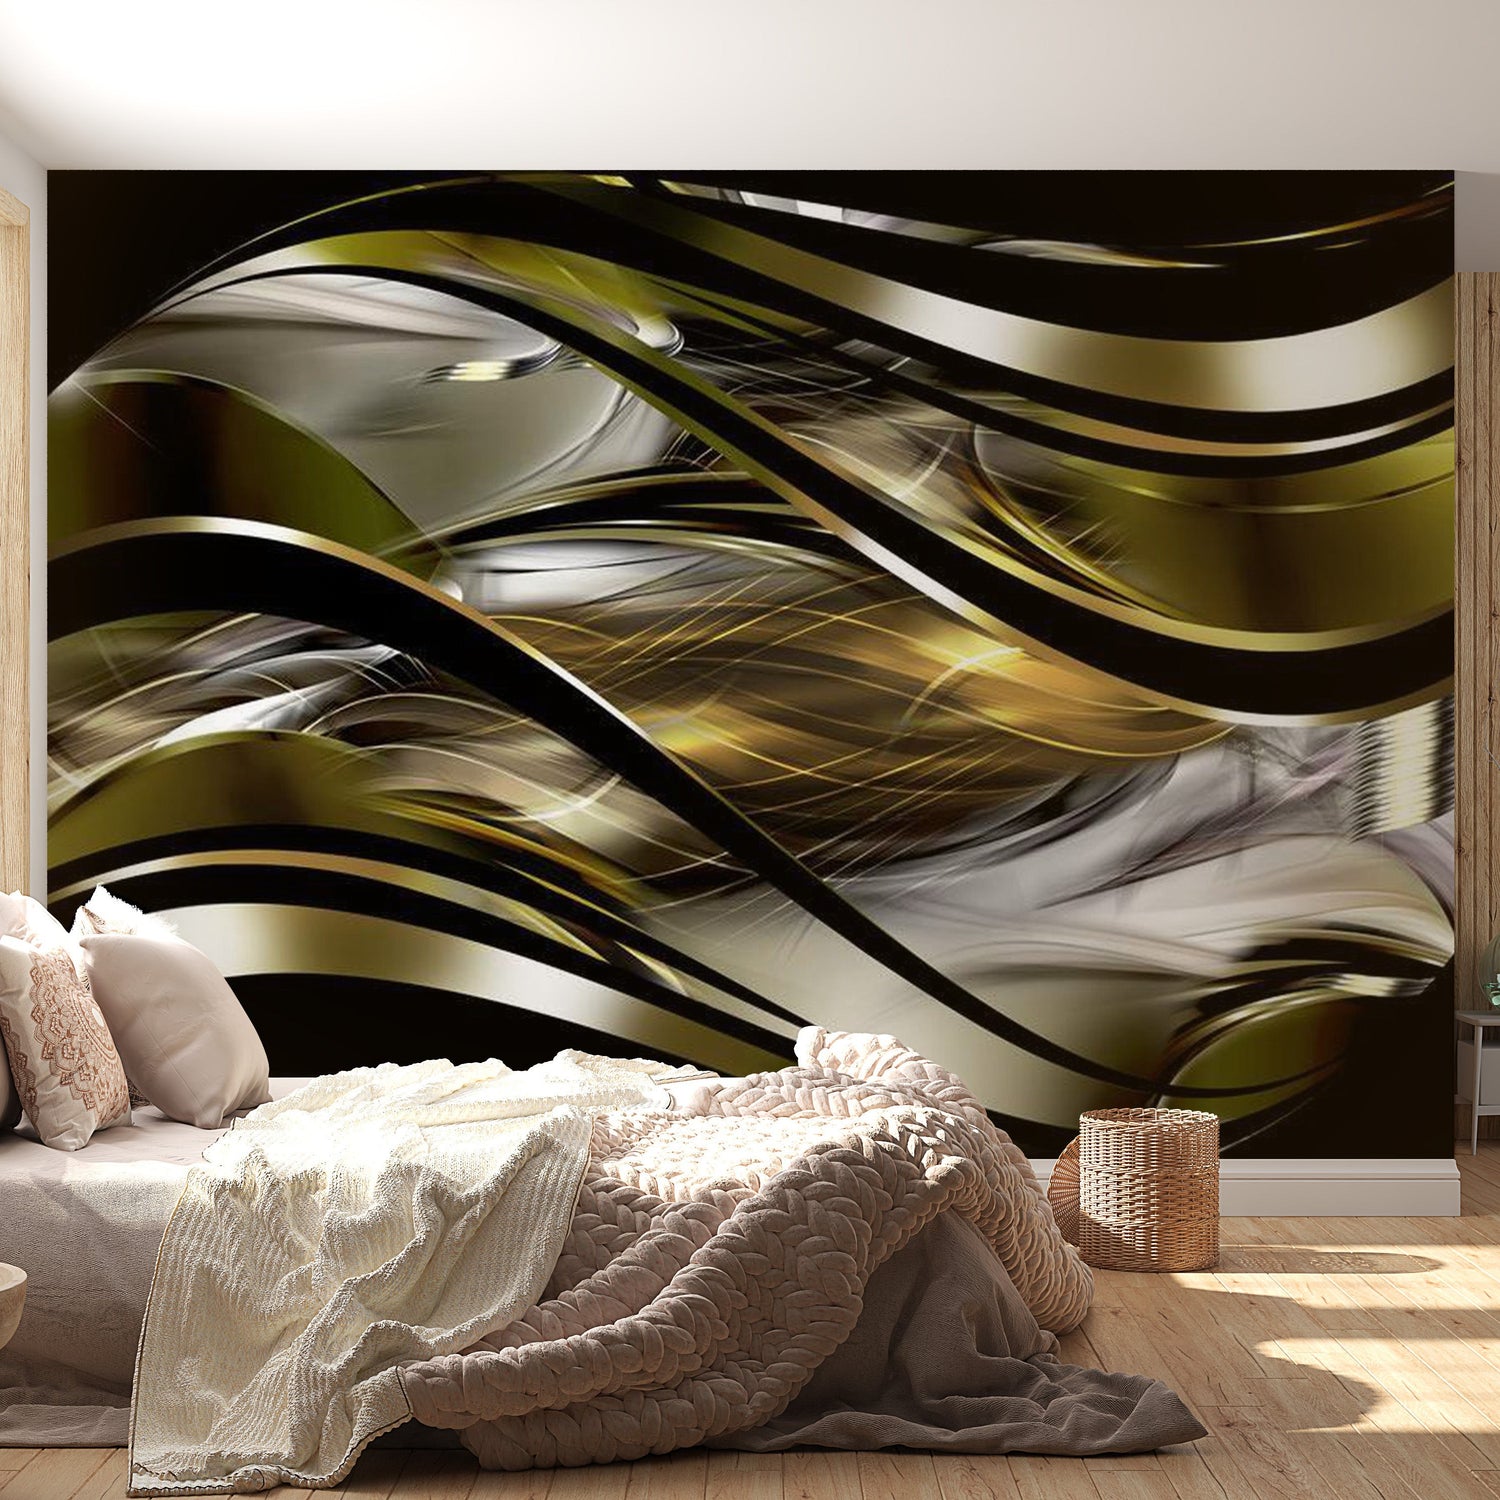 Peel & Stick Glam Wall Mural - Wind In Hair - Removable Wall Decals